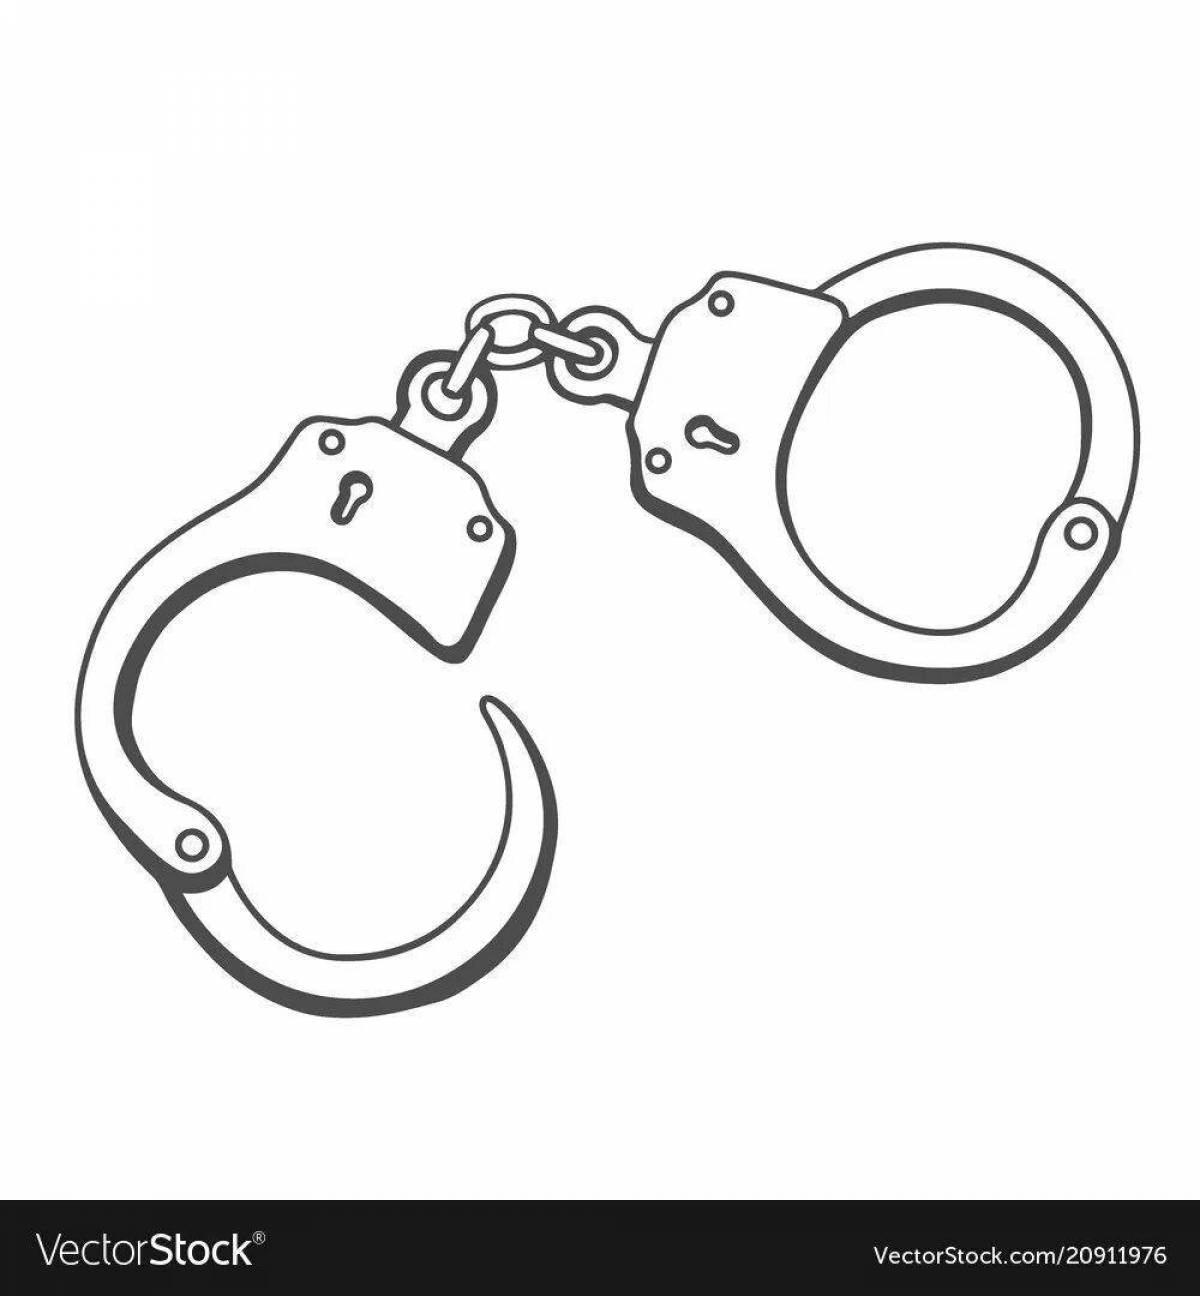 Coloring page spectacular handcuffs